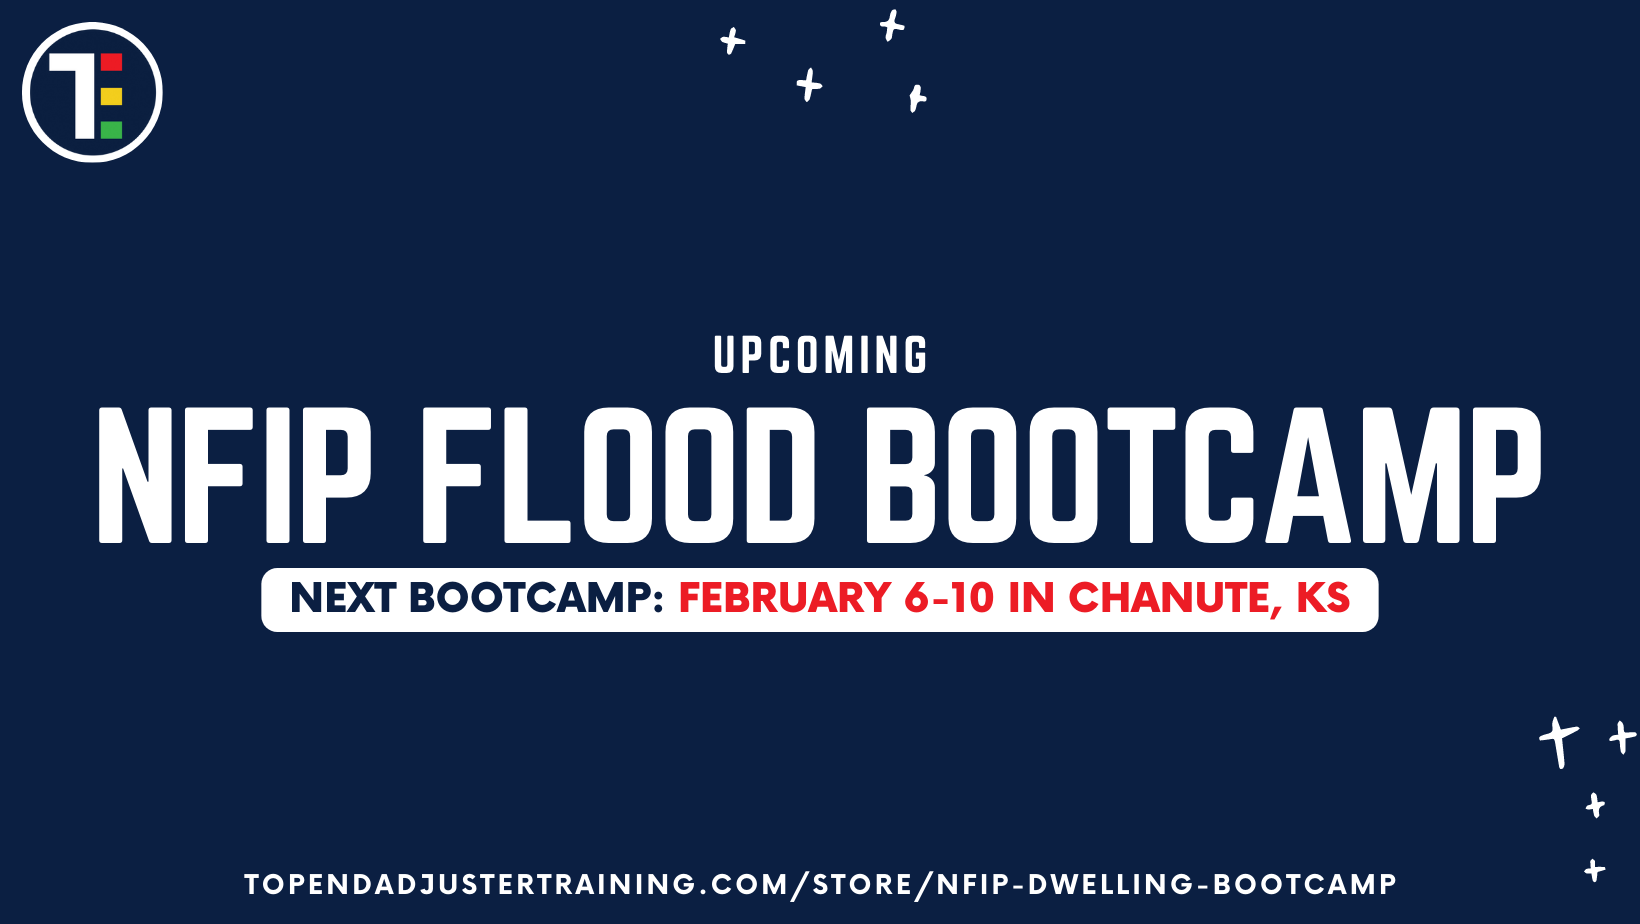 NFIP Flood Bootcamp presented by Top End Adjuster Training